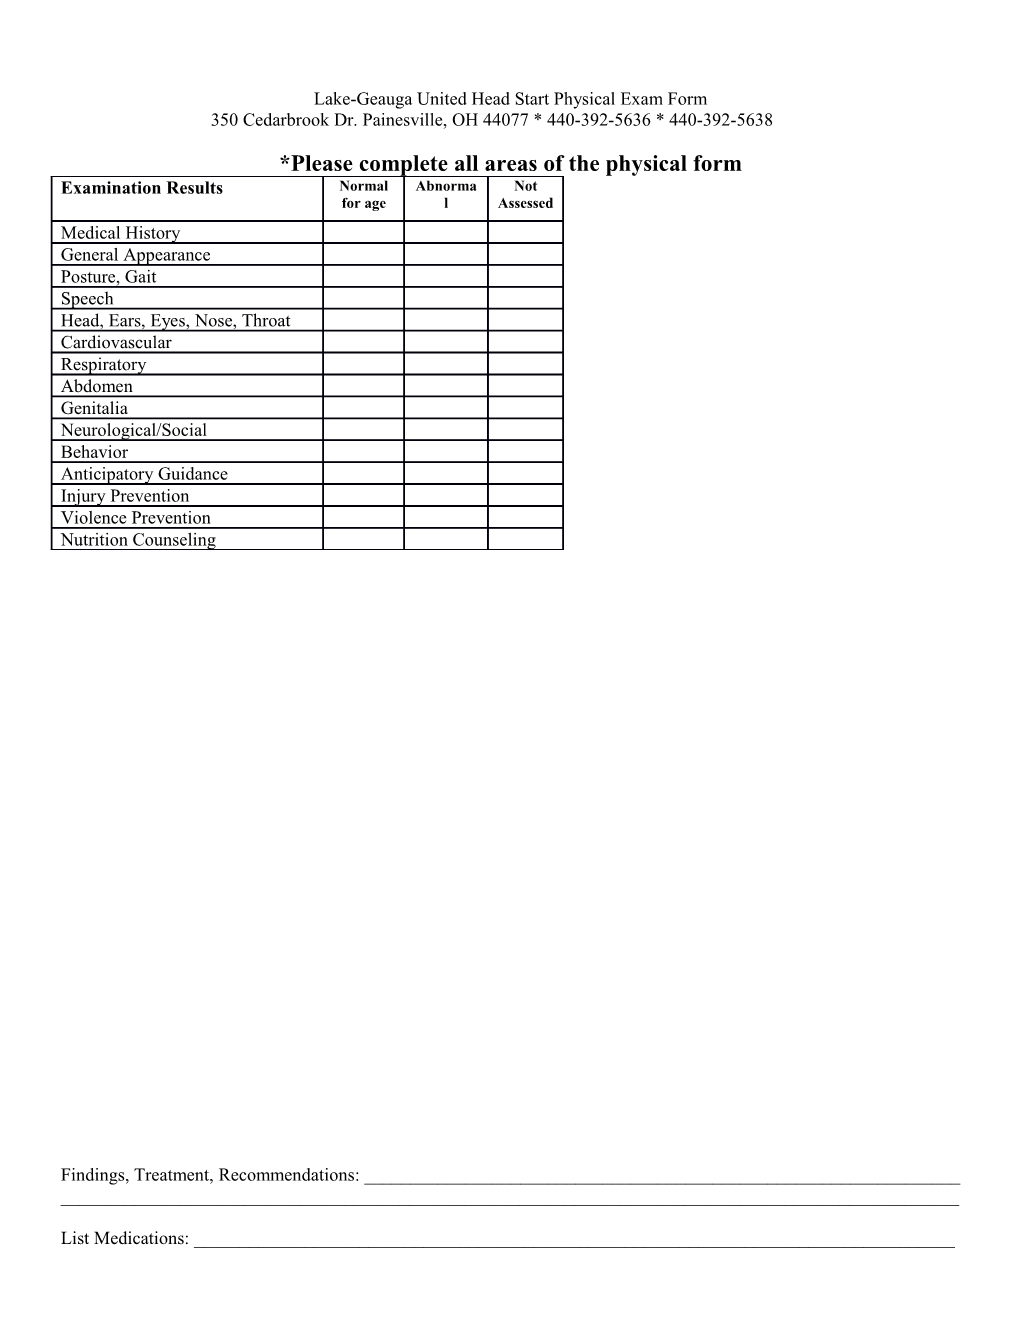 Lake-Geauga United Head Start Physical Exam Form